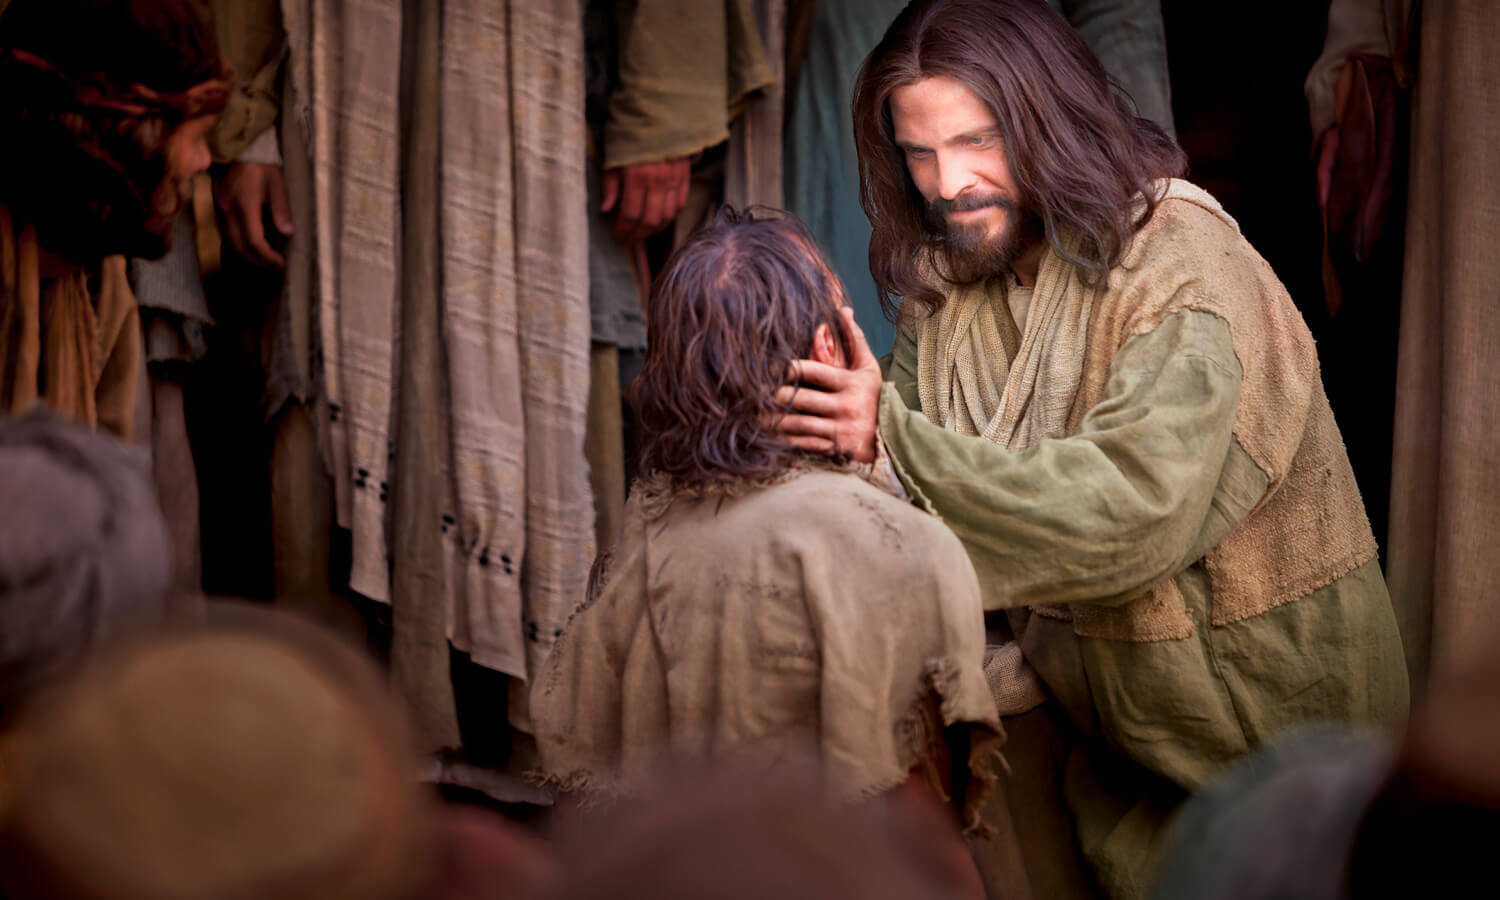 Why did Jesus forbid the people to tell others about miracles He performed?